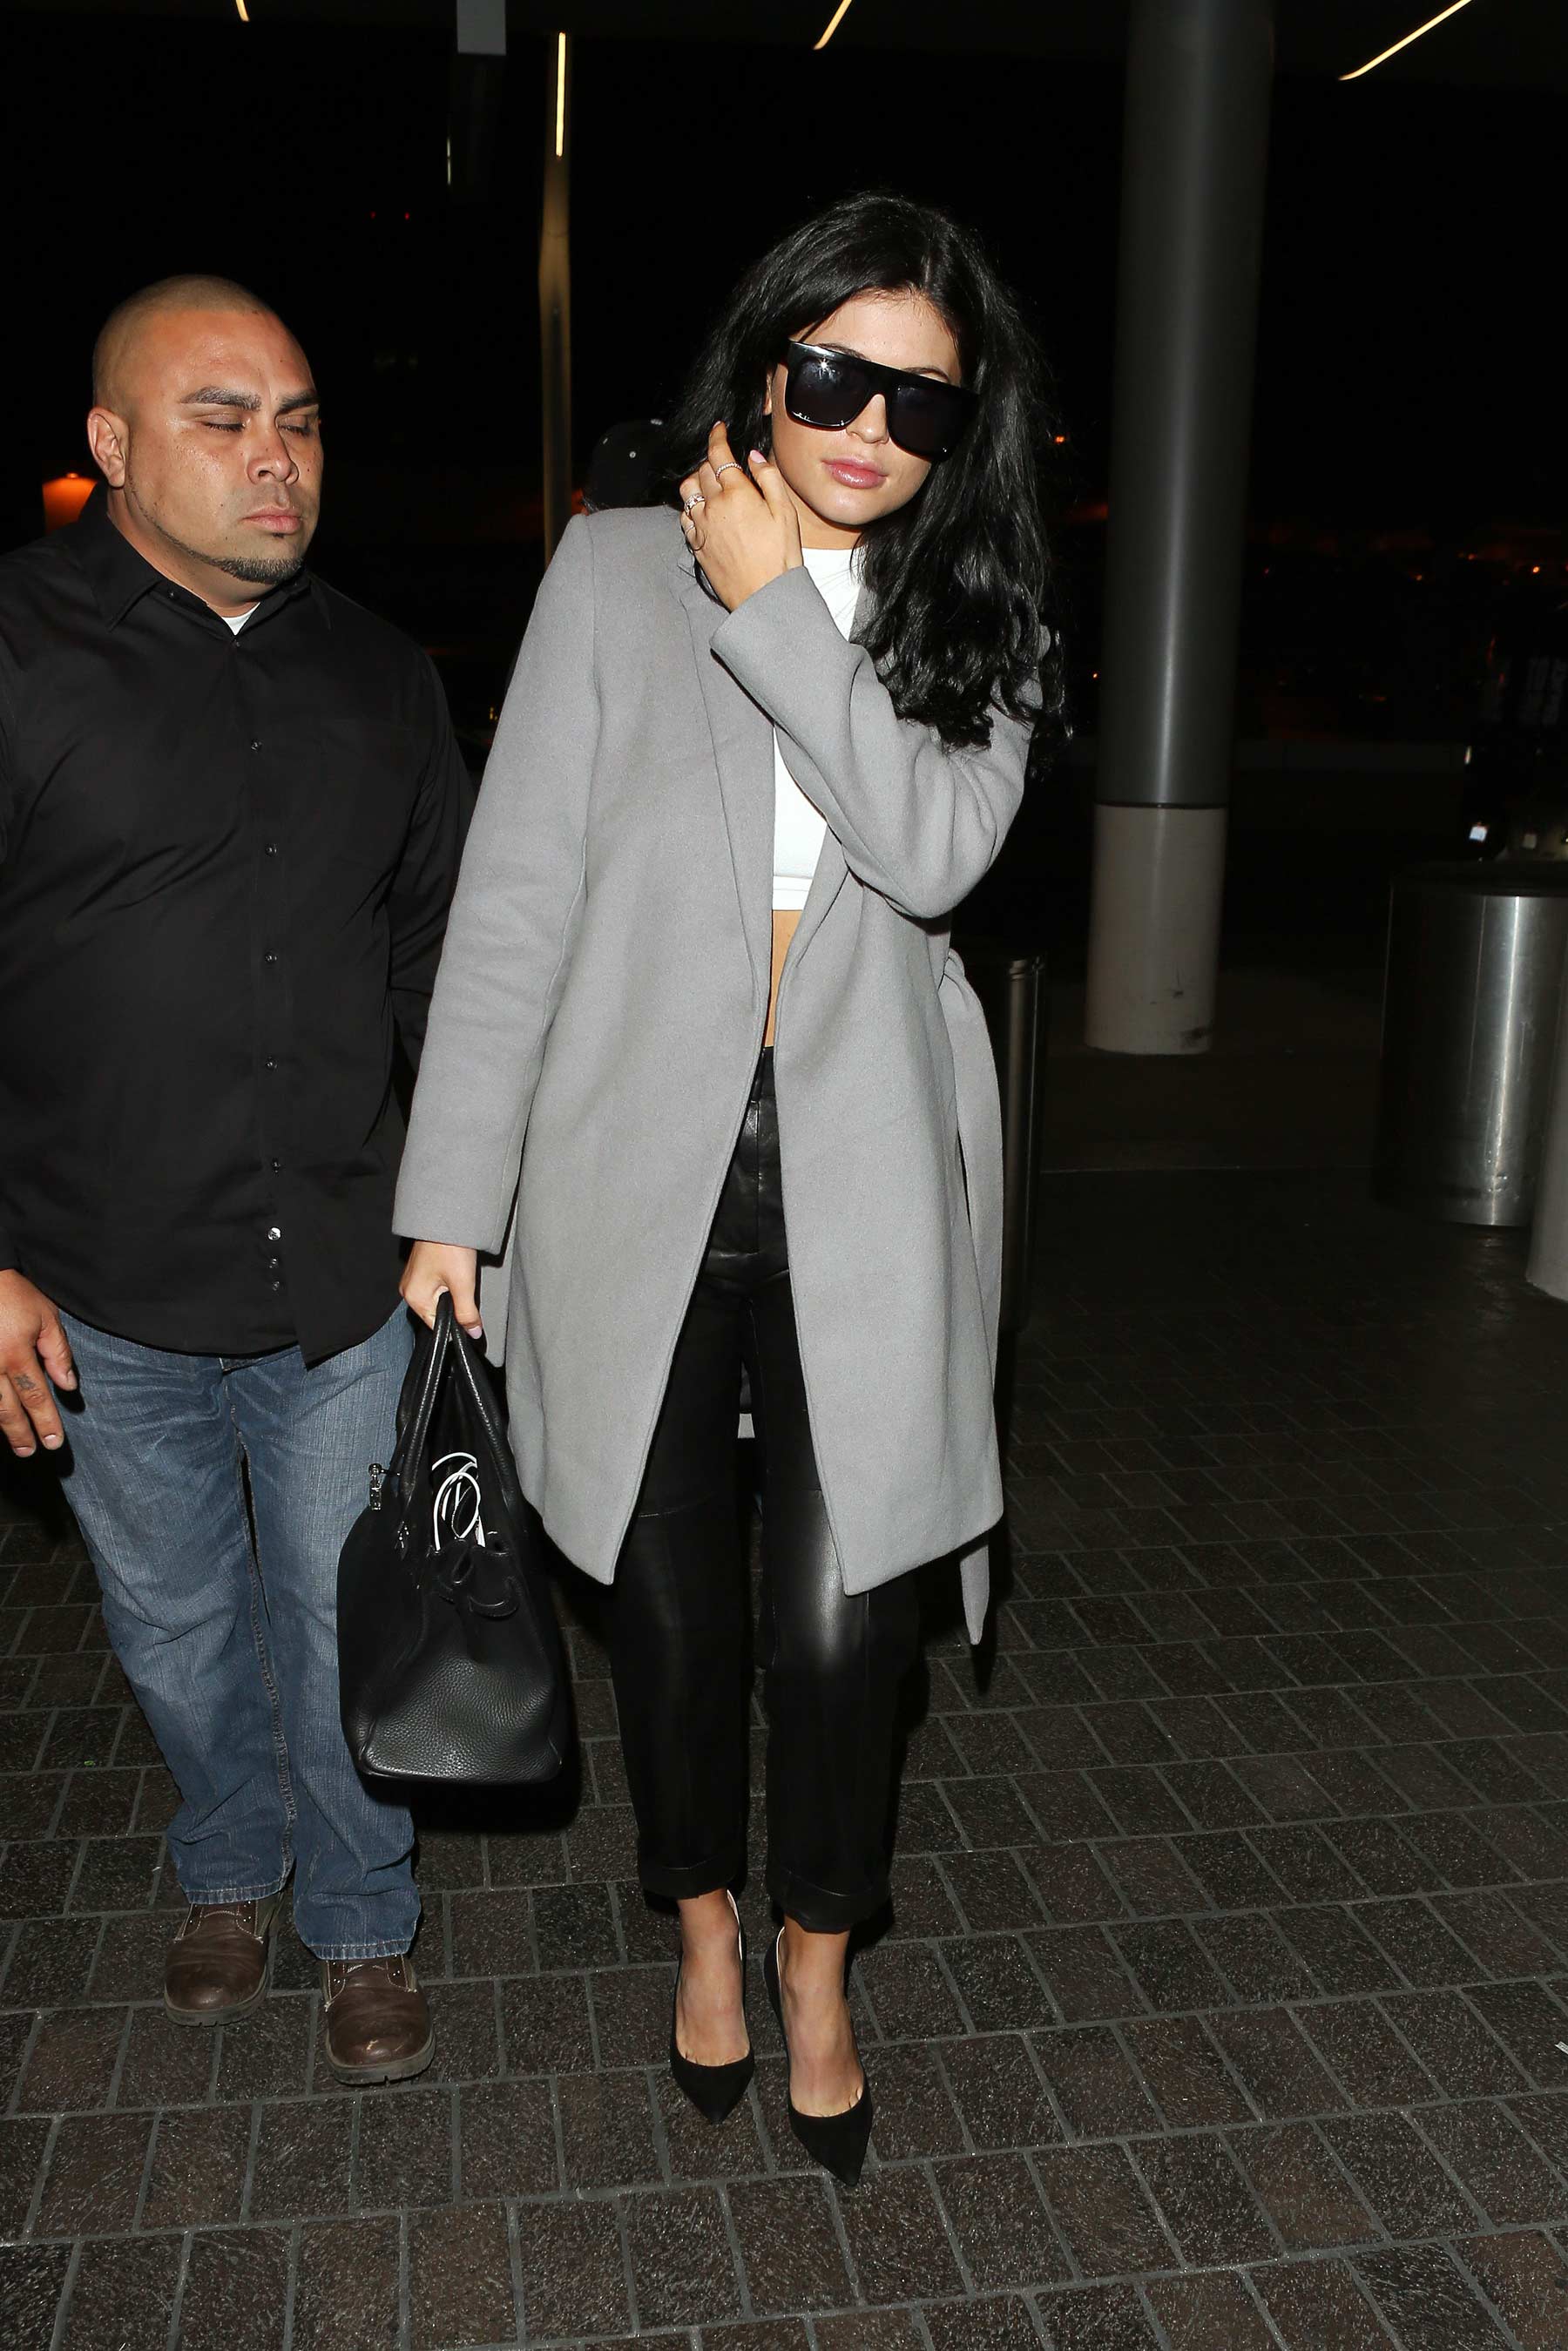 Kylie Jenner at LAX